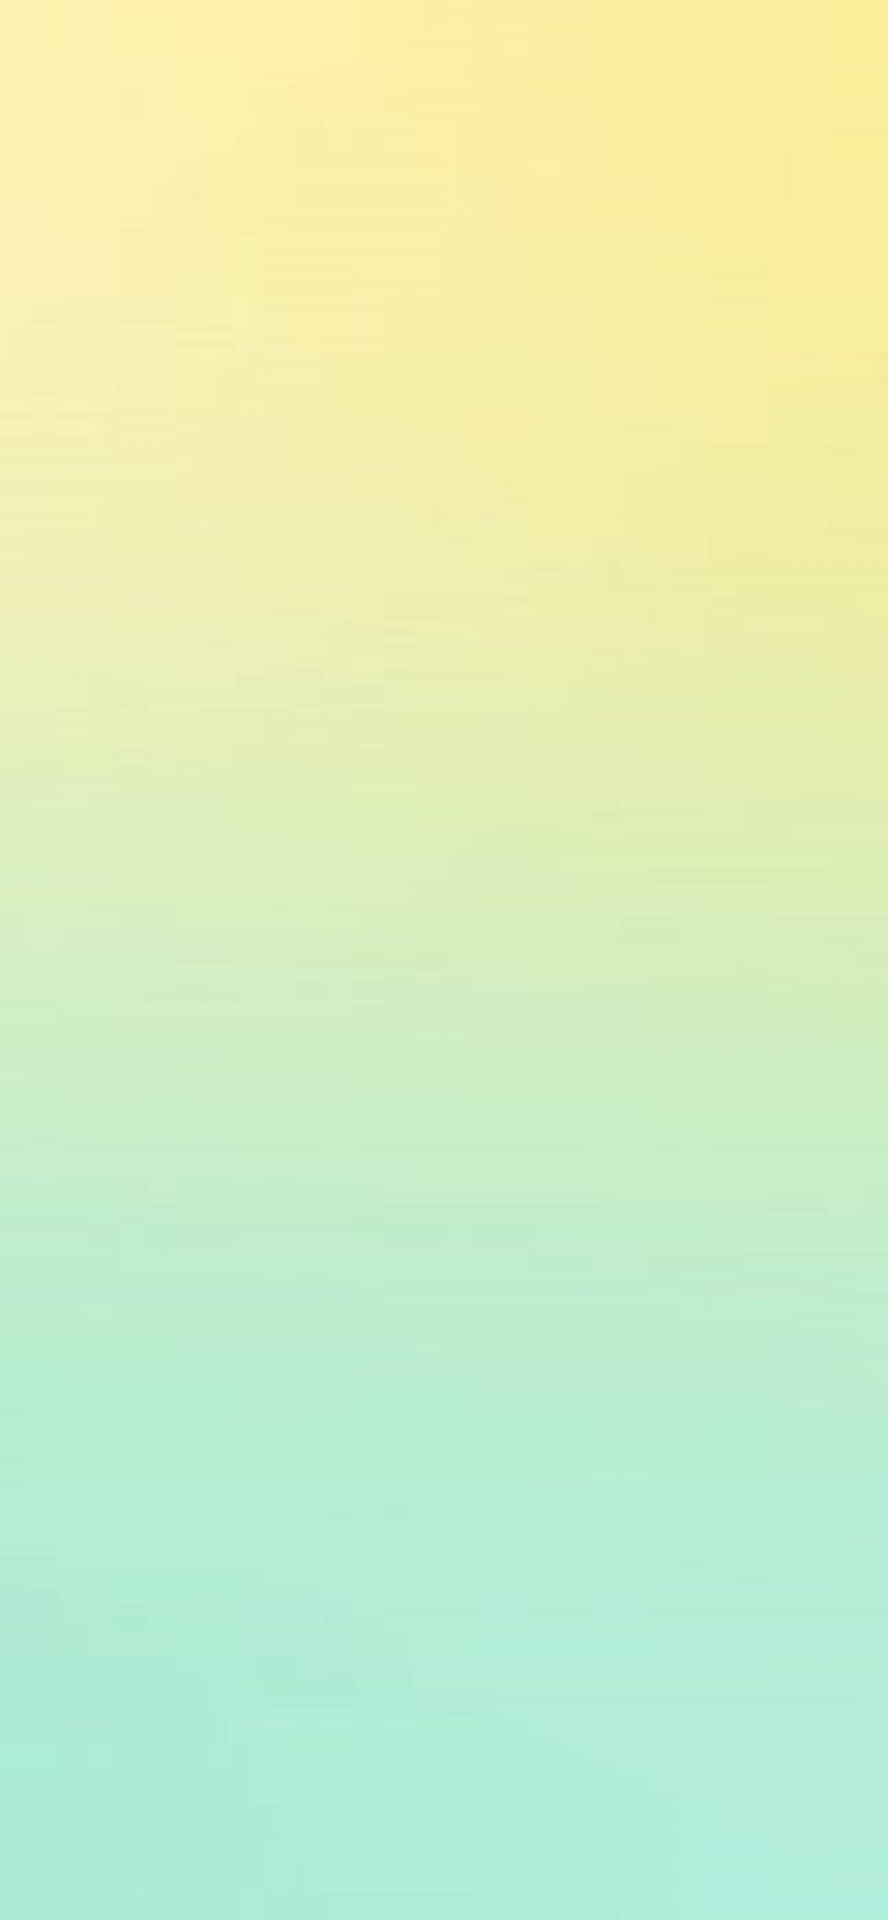 Pastel Ipad Gradient Yellow To Green Picture